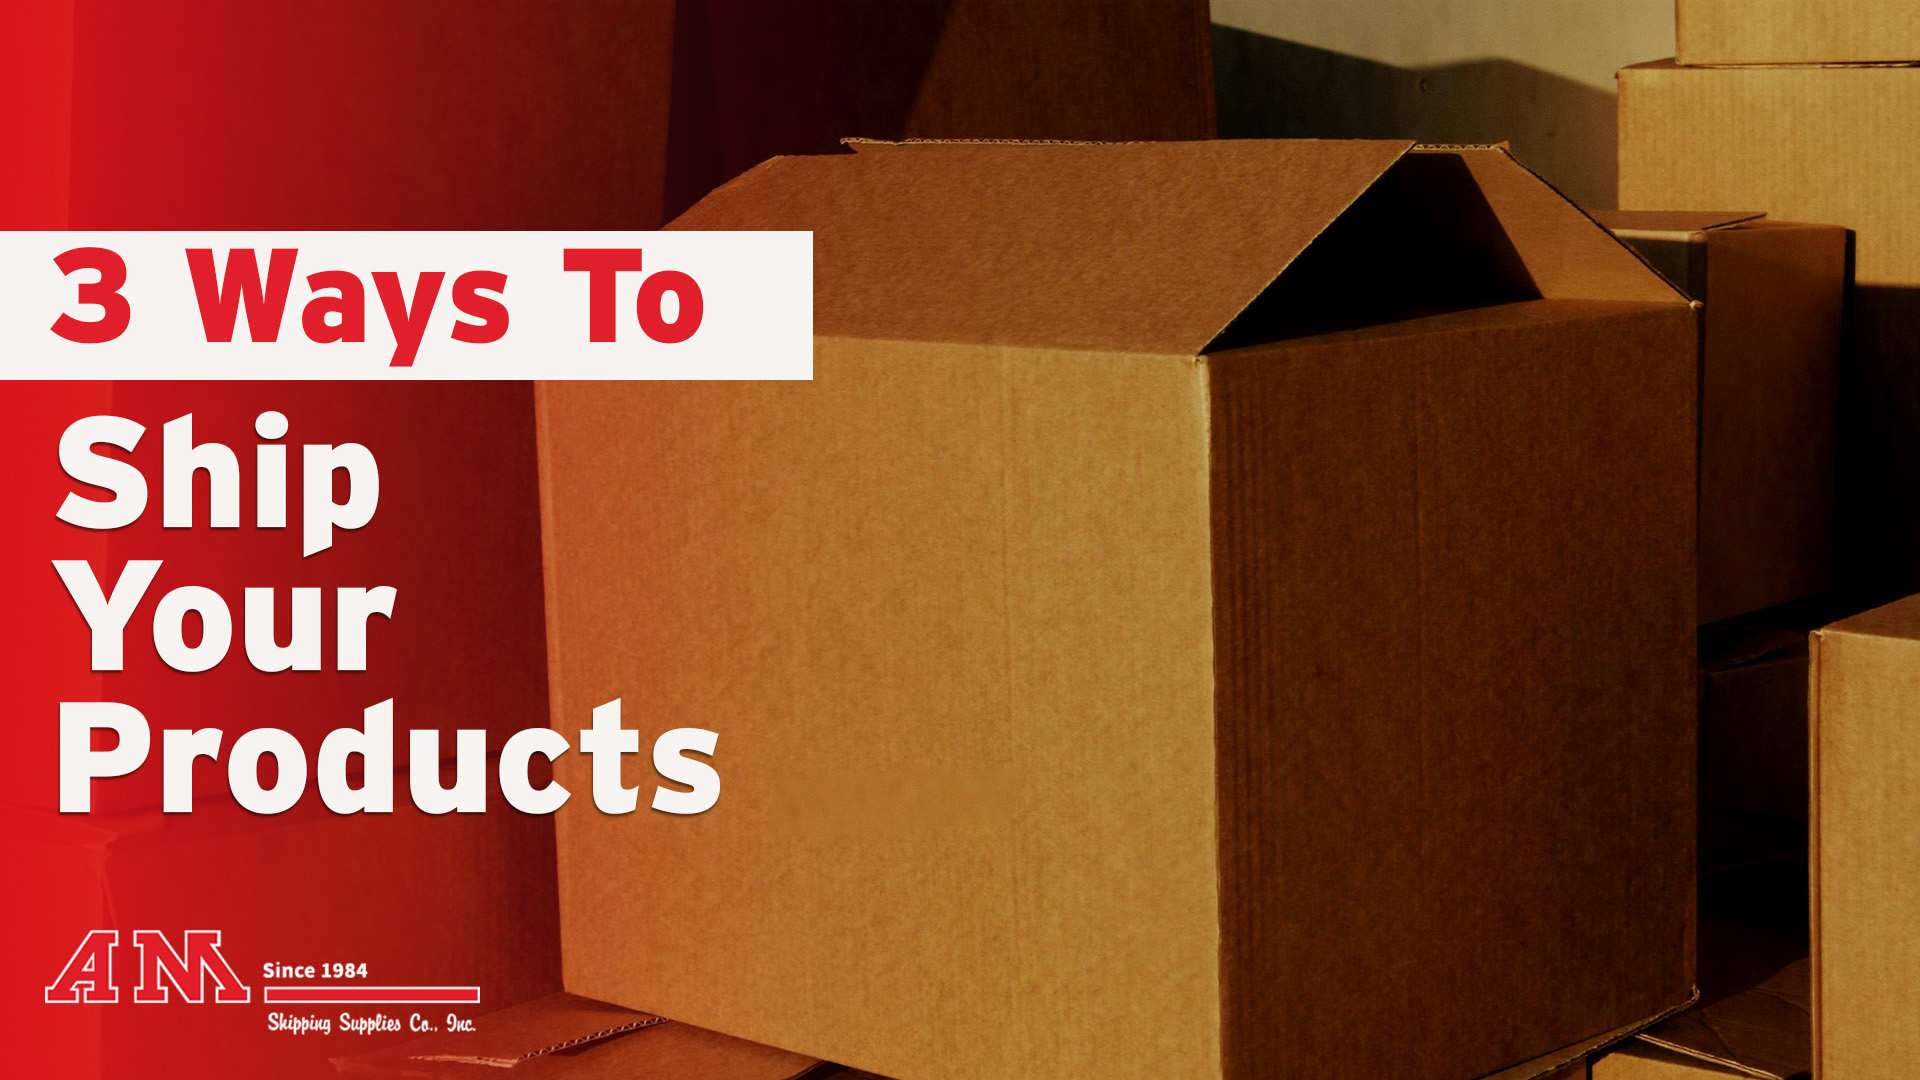 3 Ways to Ship Your Products